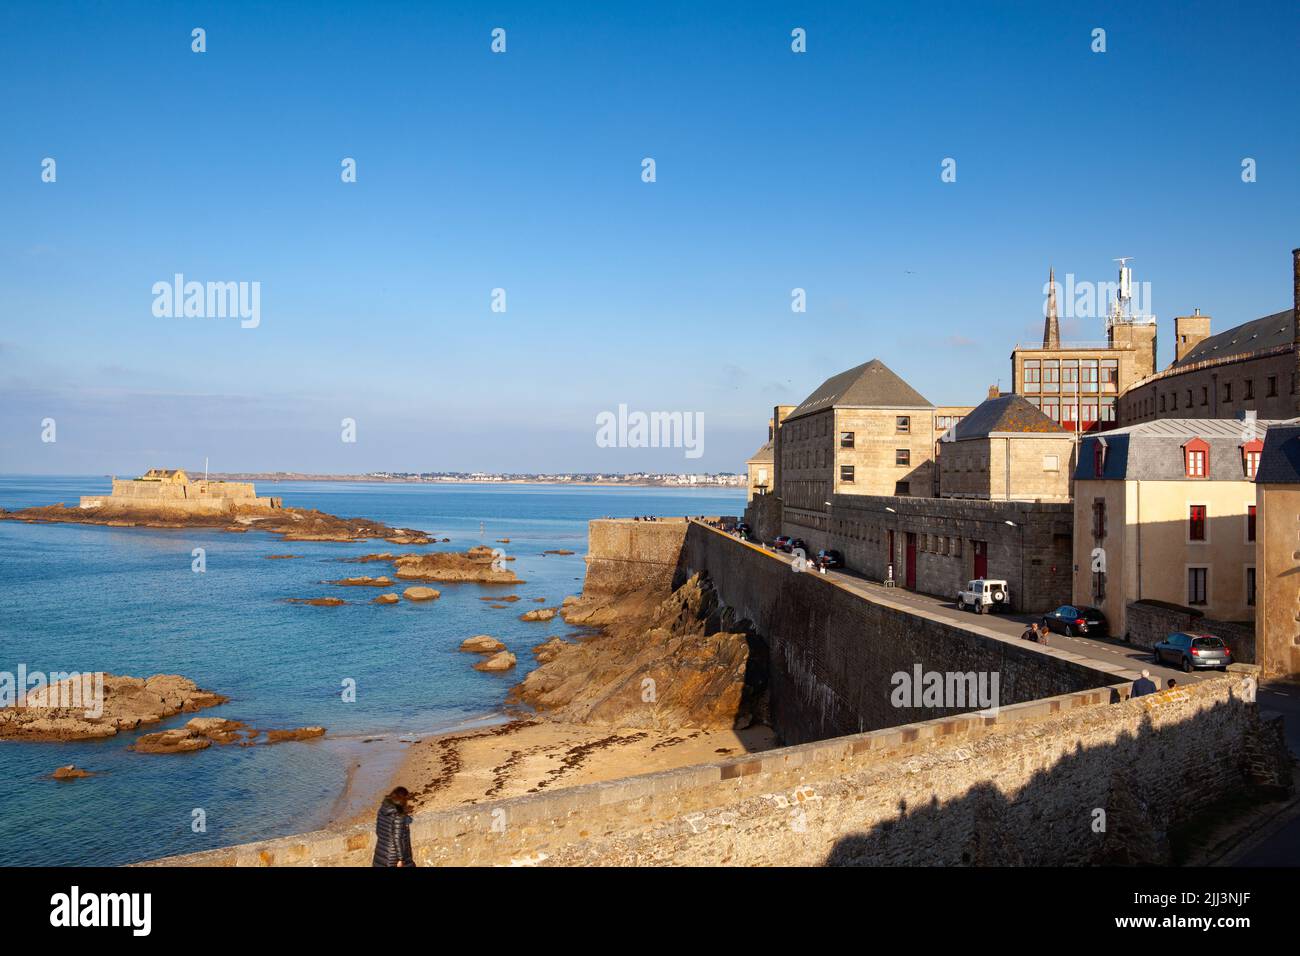 Saint Malo, France -  15 October, 2021: View from amazing promenade on the ramparts in the old town, Saint Malo, France. Stock Photo